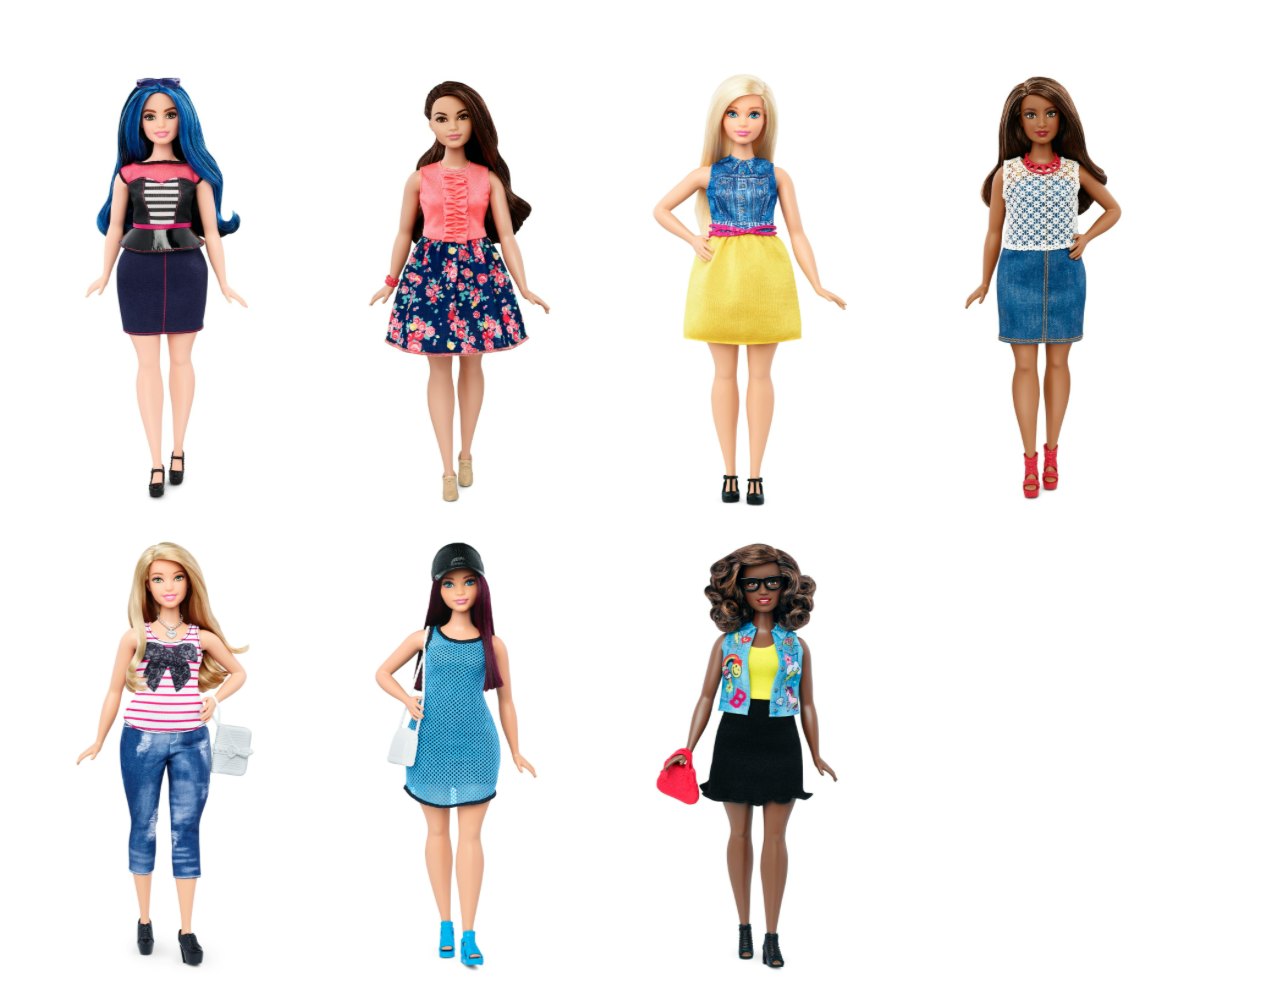 barbie and body image